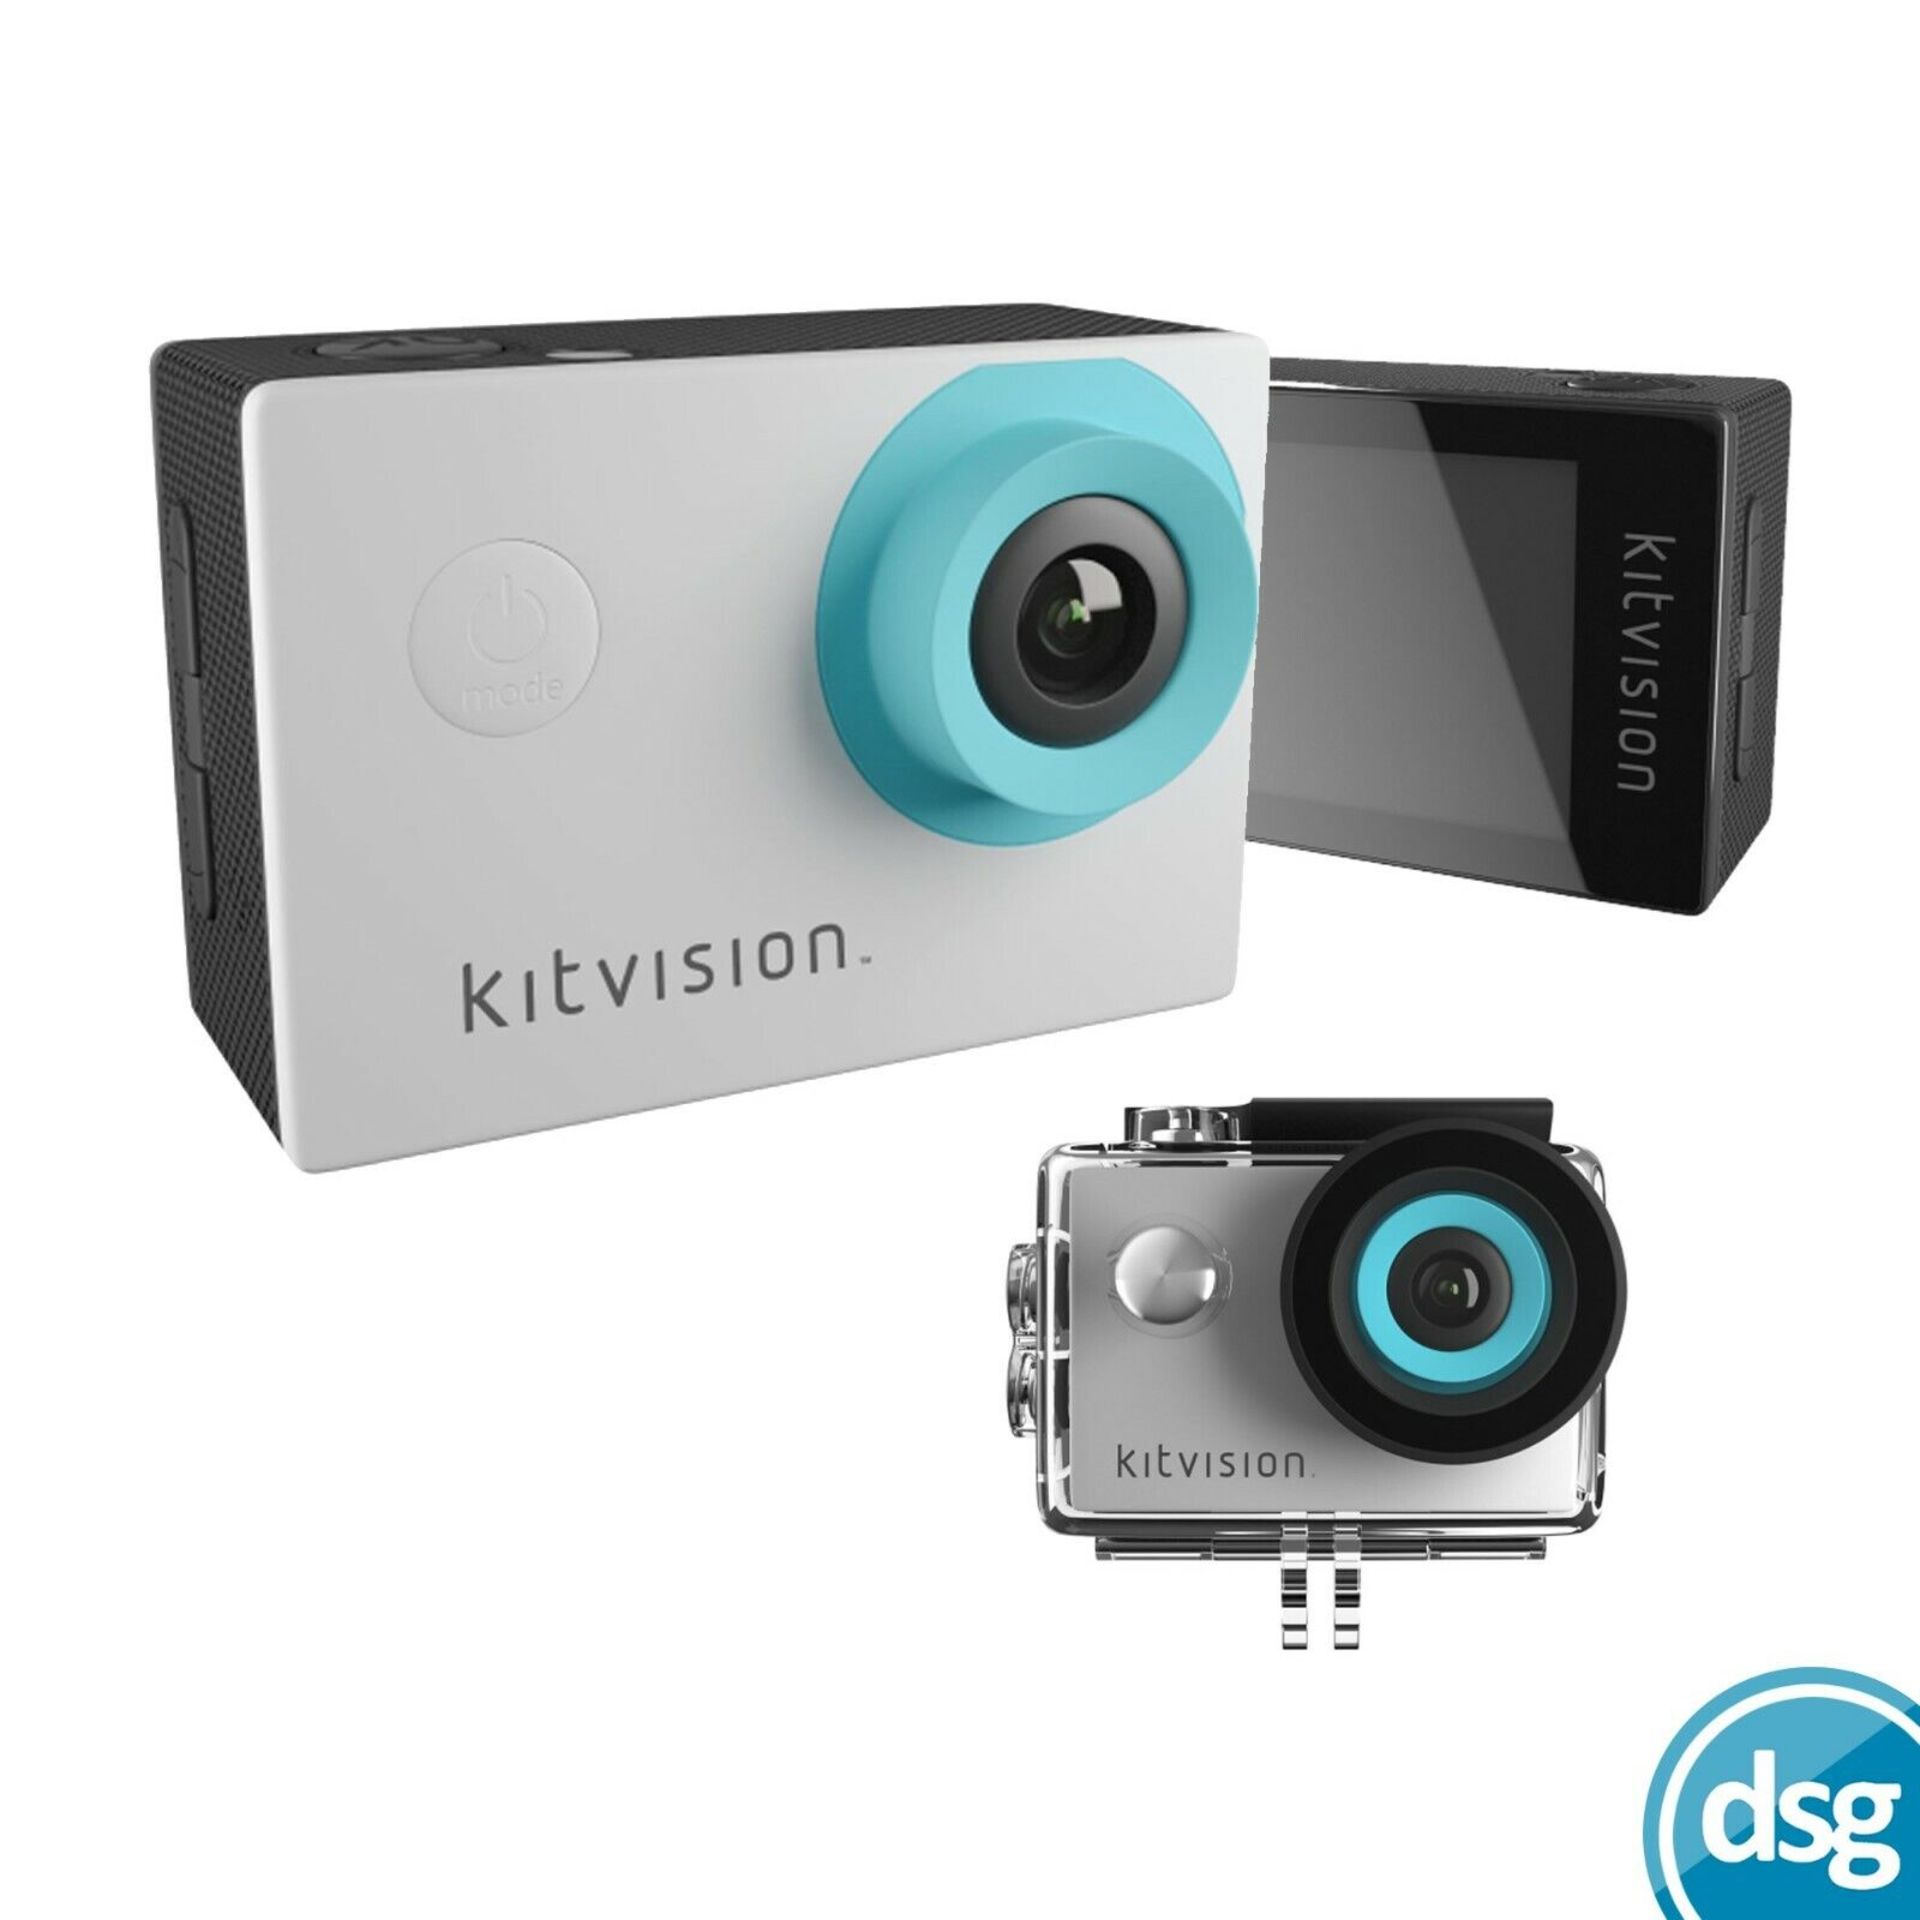 Kitvision 720p Action Camera & Accessories - New and Boxed - Bild 2 aus 5